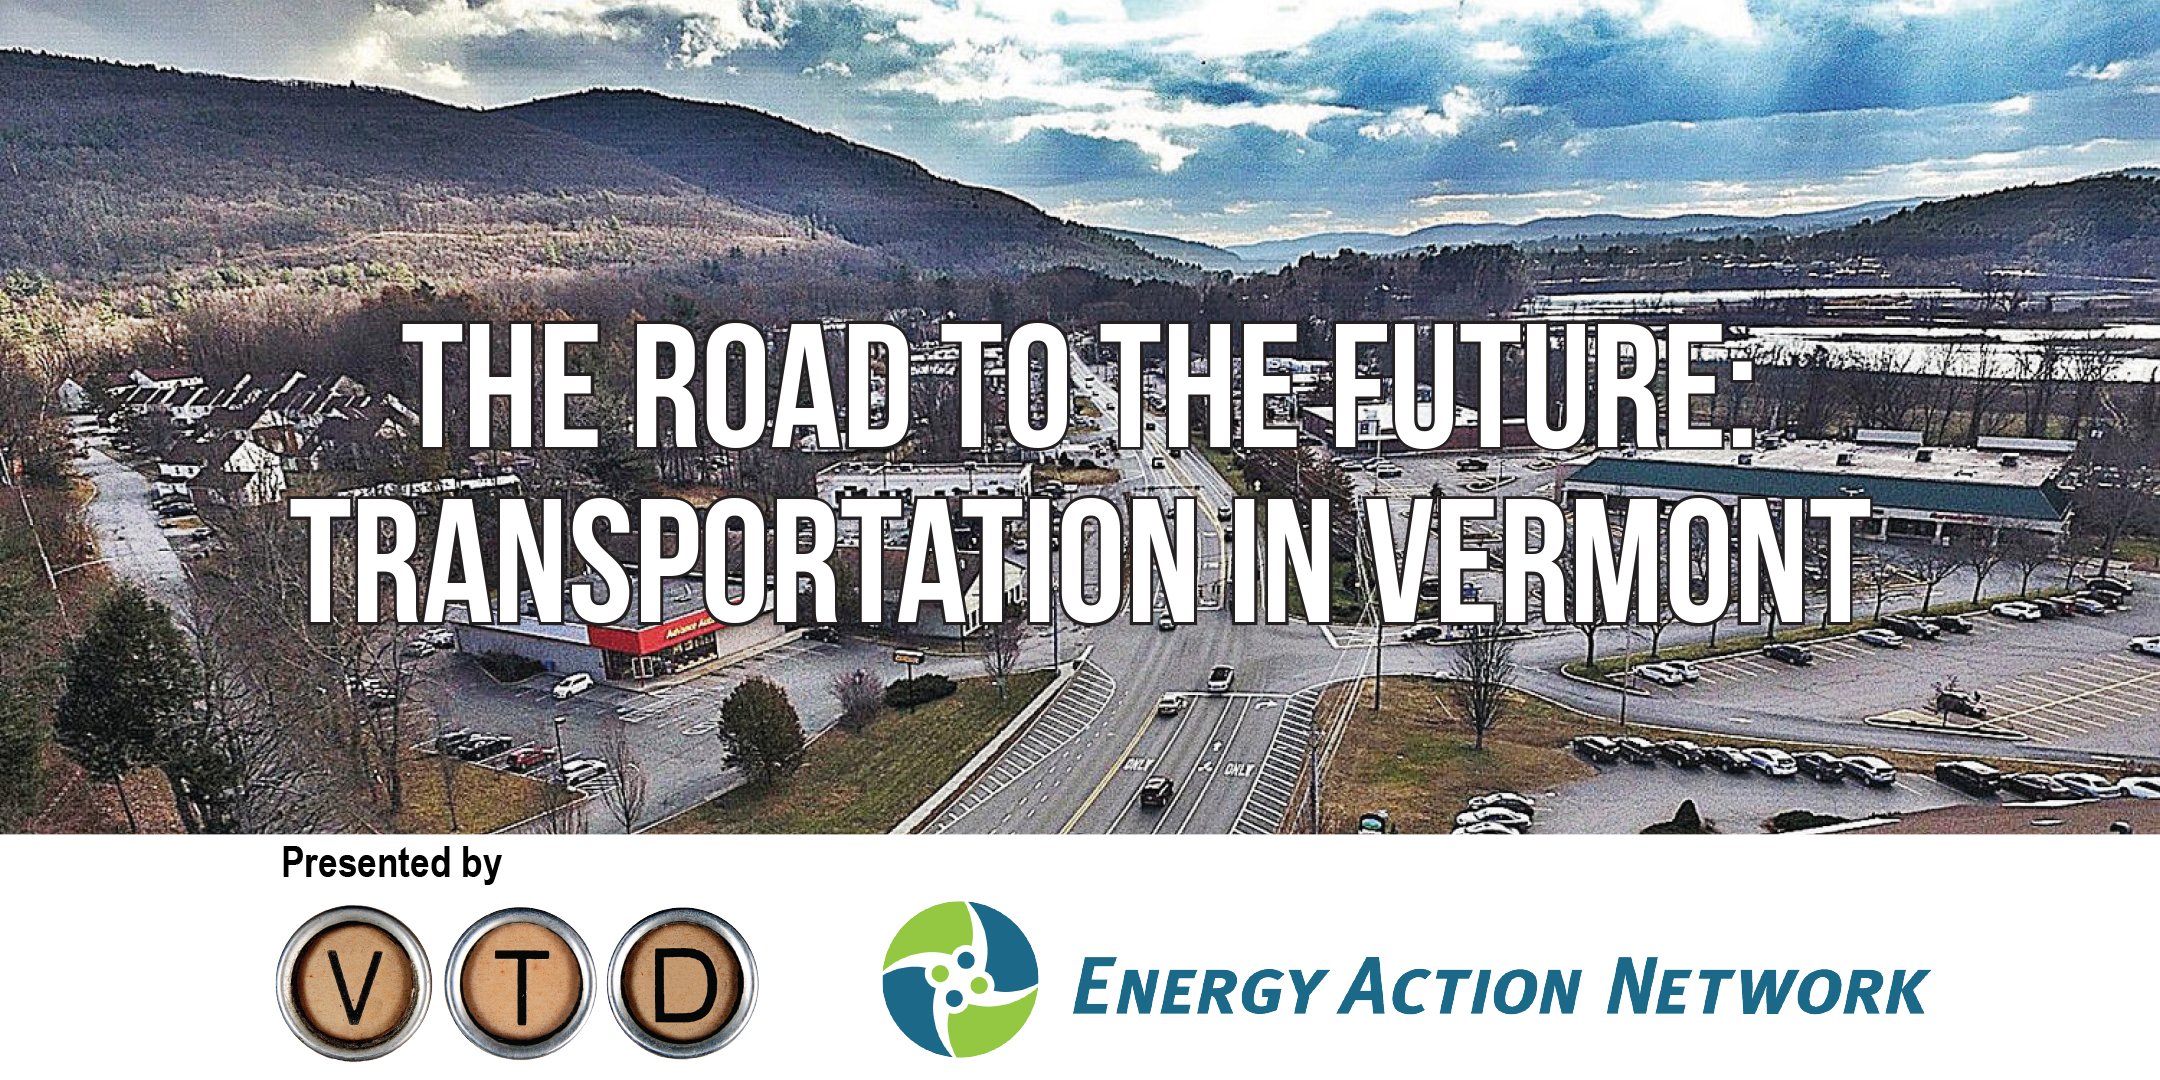 The Road to the Future: Transportation in Vermont